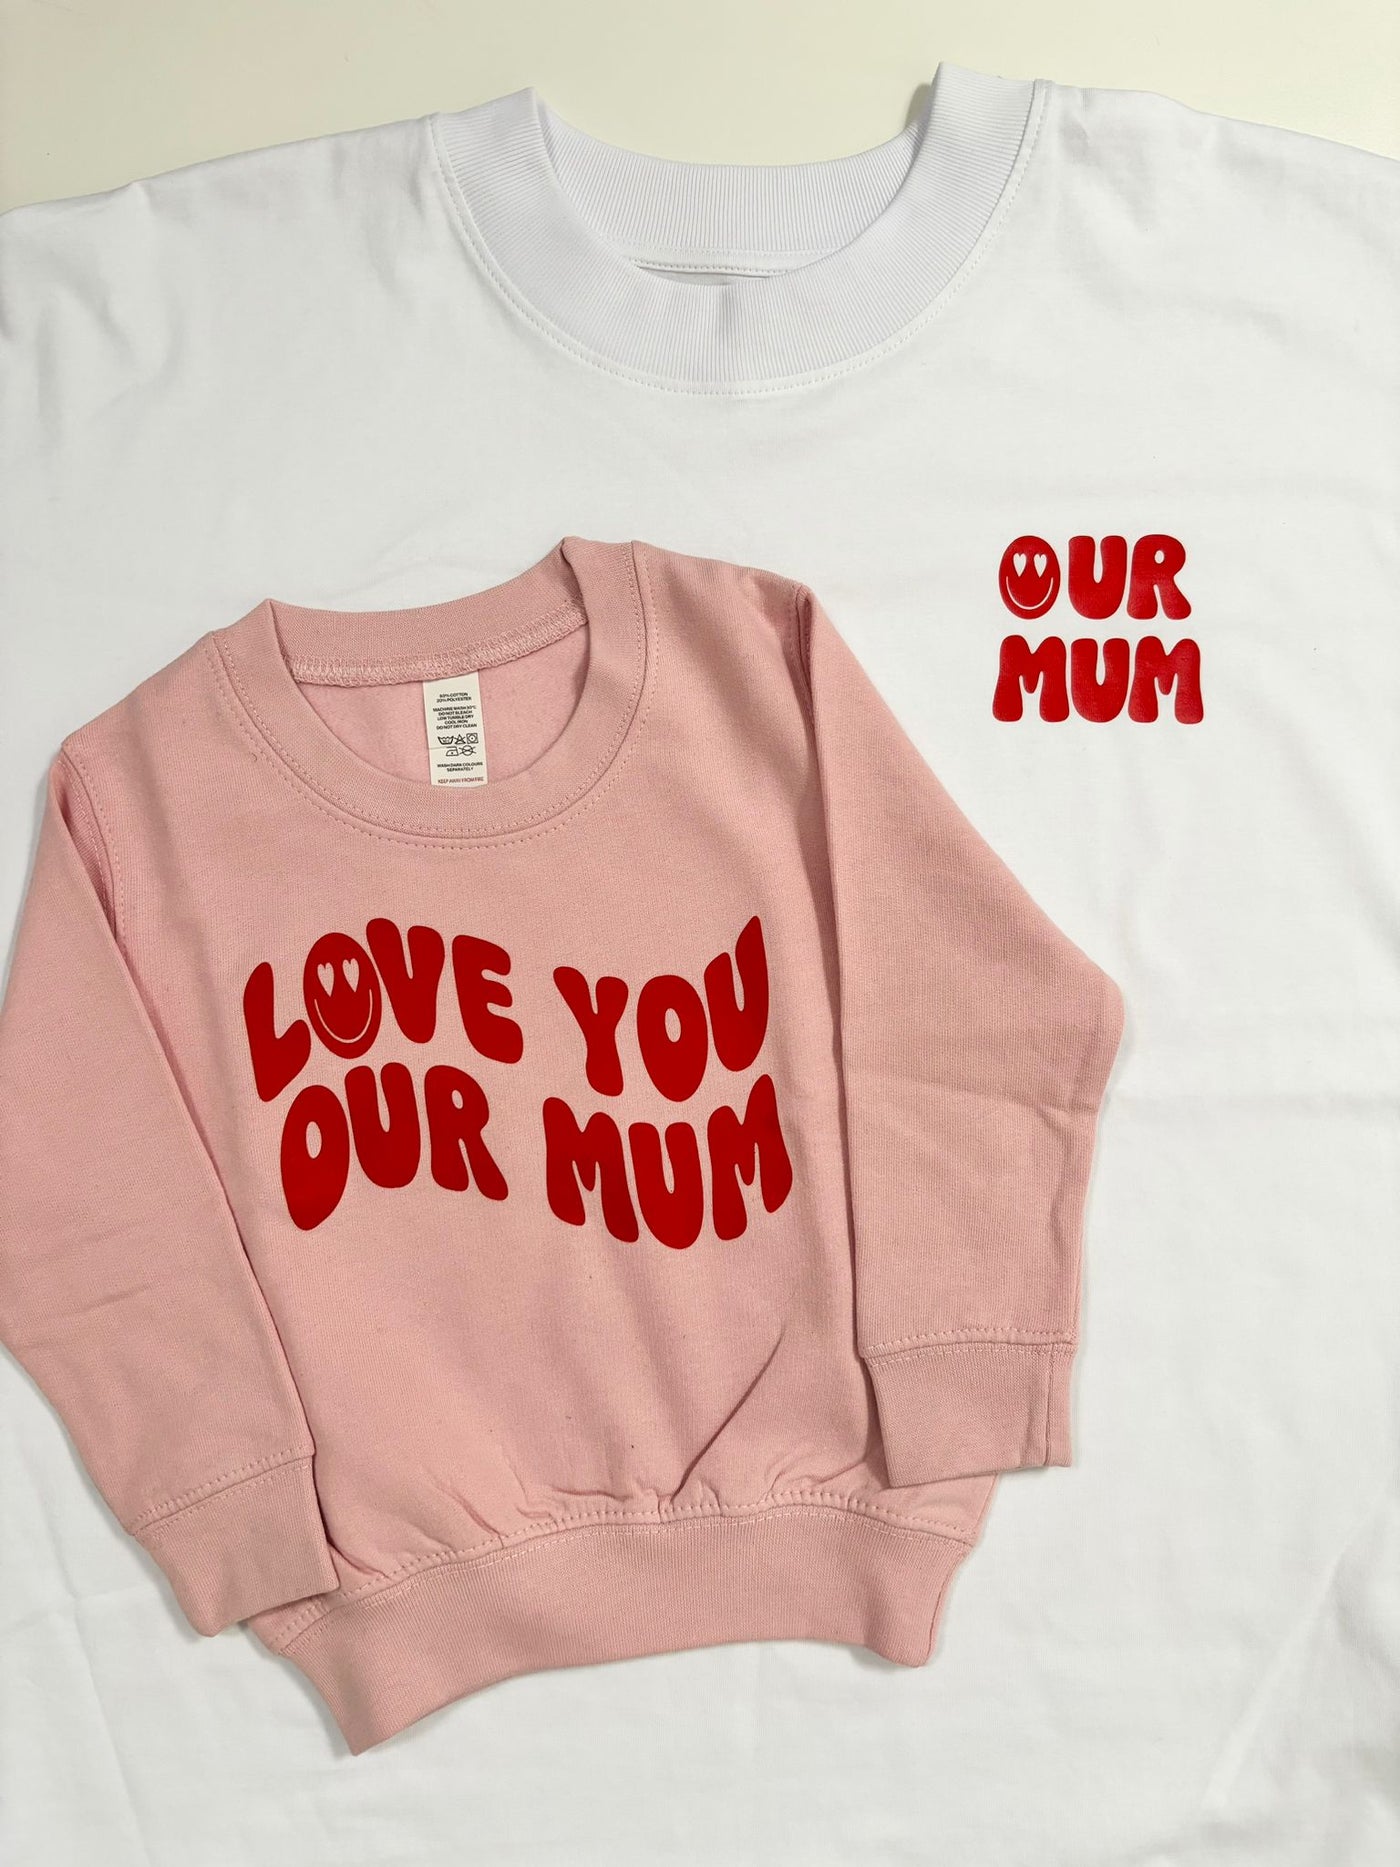 Our Albie ‘Love You Our Mum’ sweatshirt for kids in pink cherry